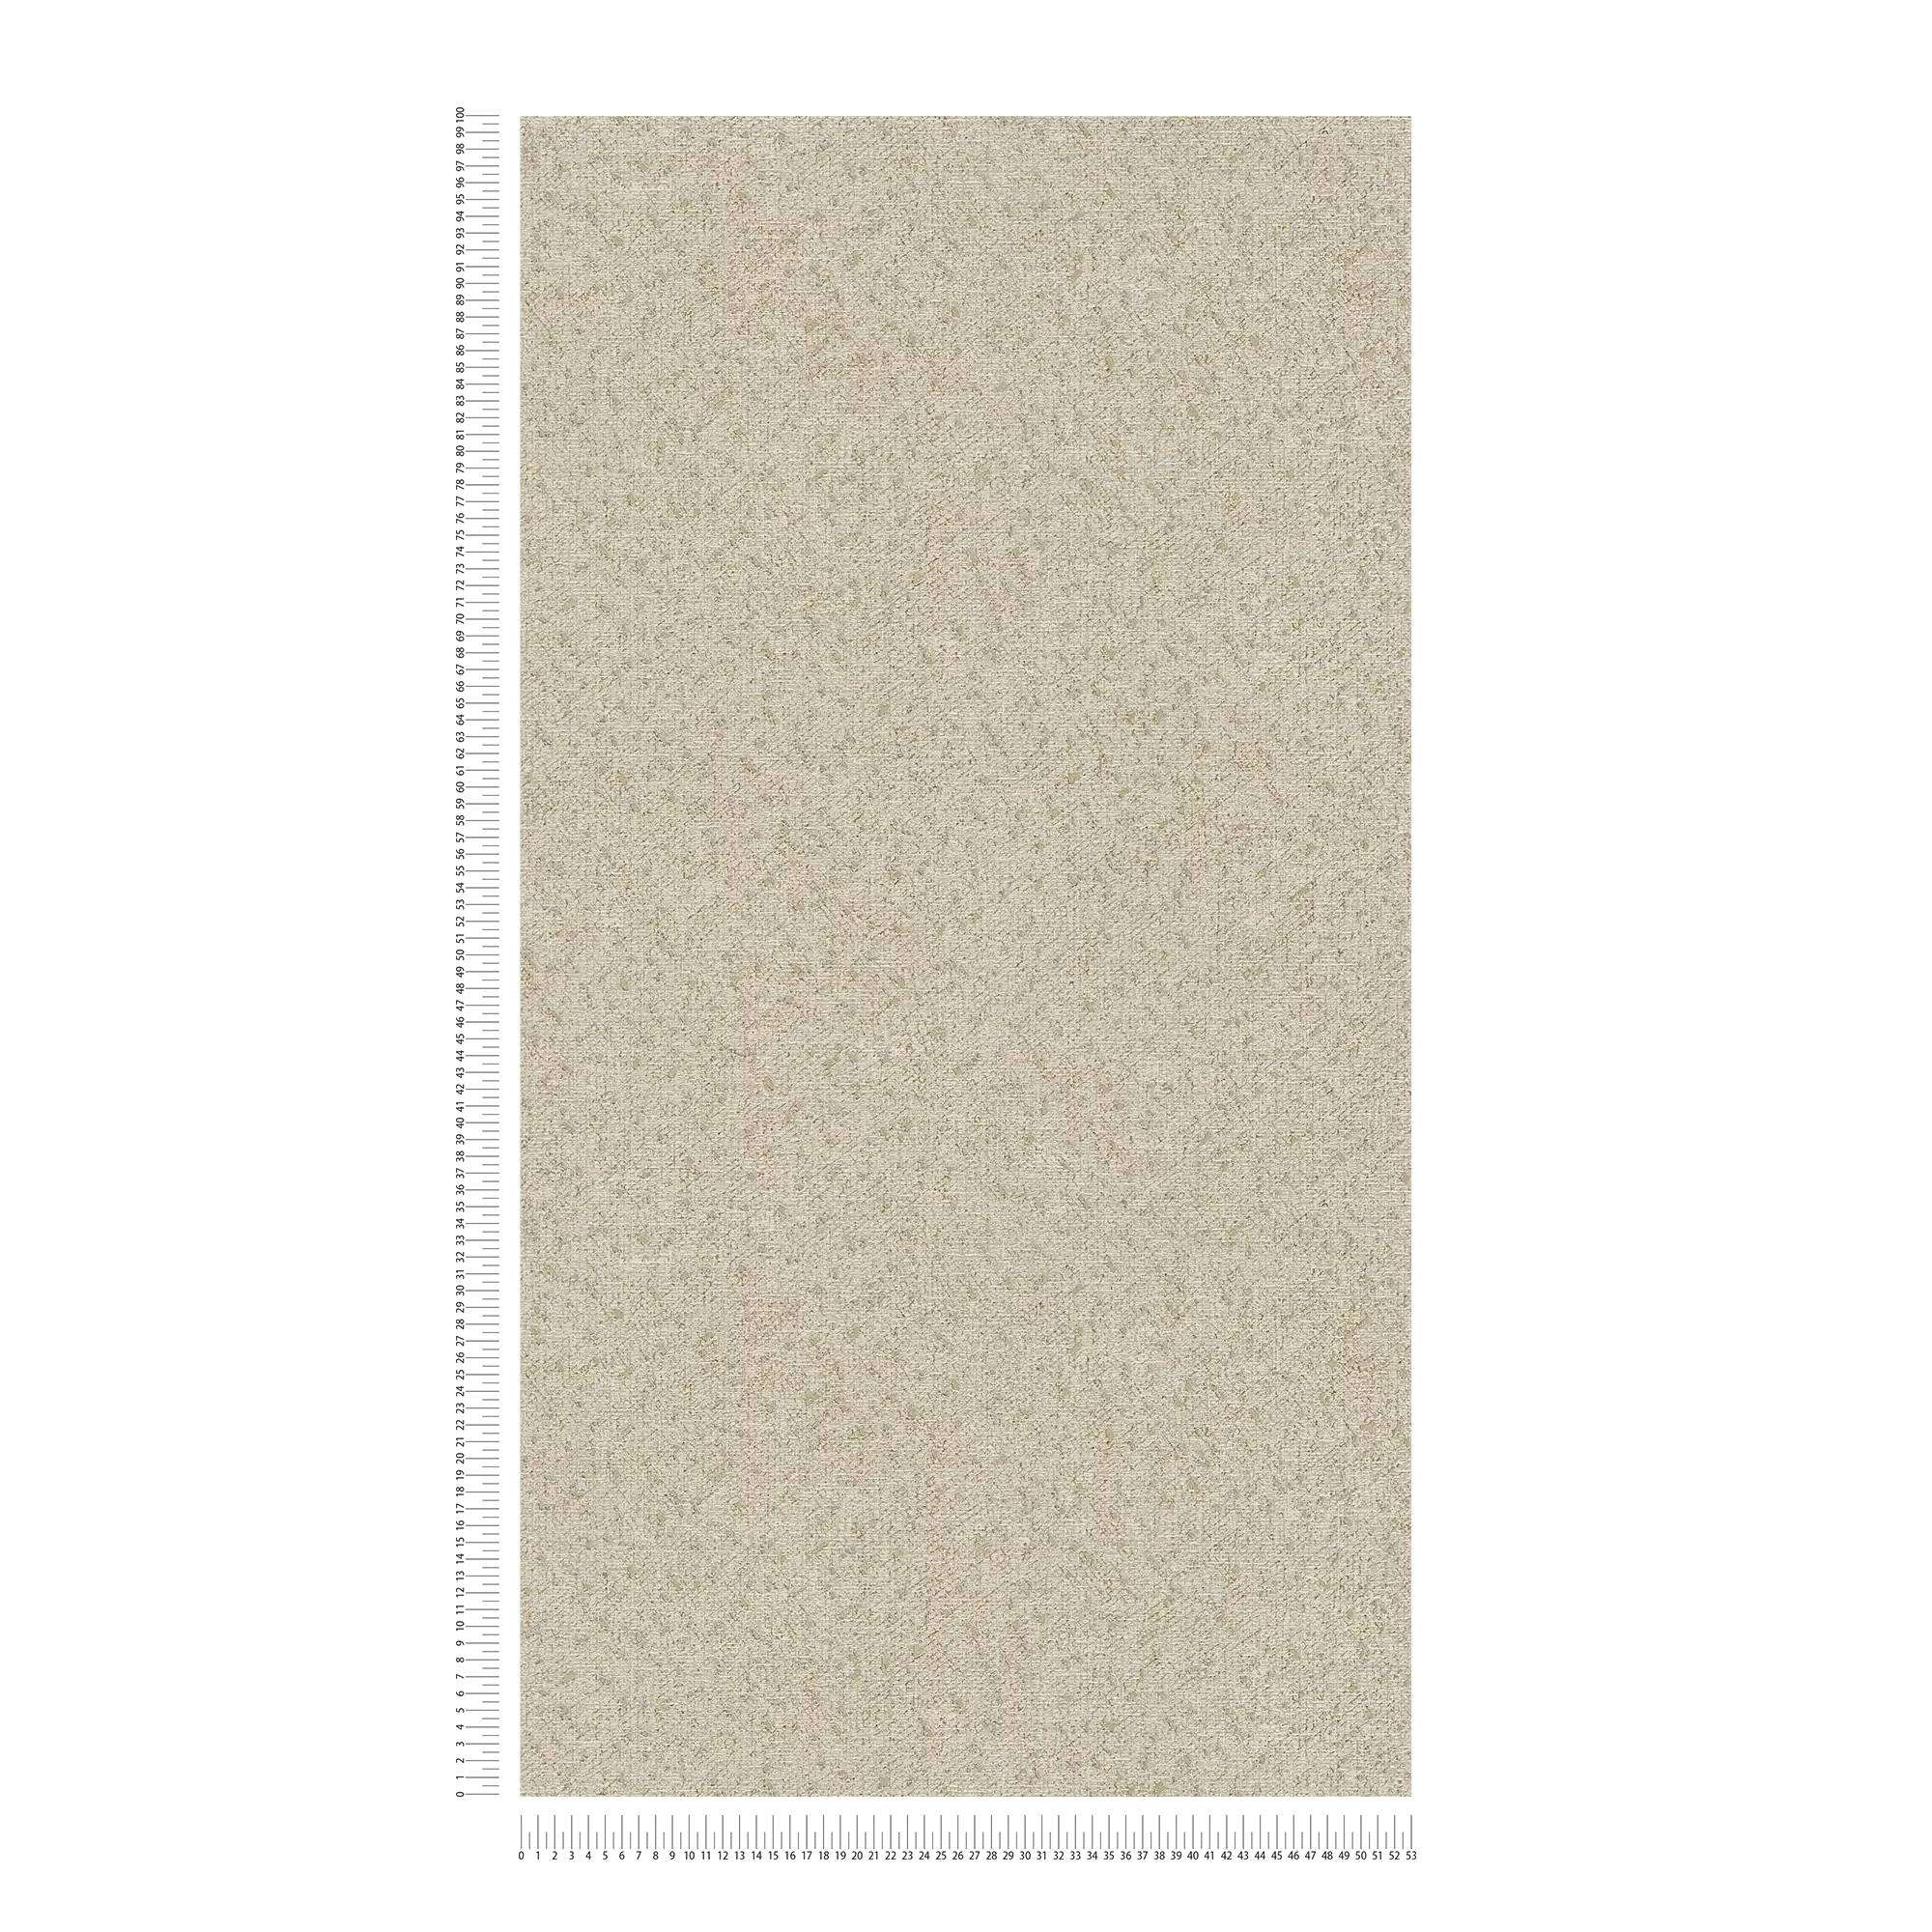             Wallpaper with textile structure and metallic accent - beige, grey
        